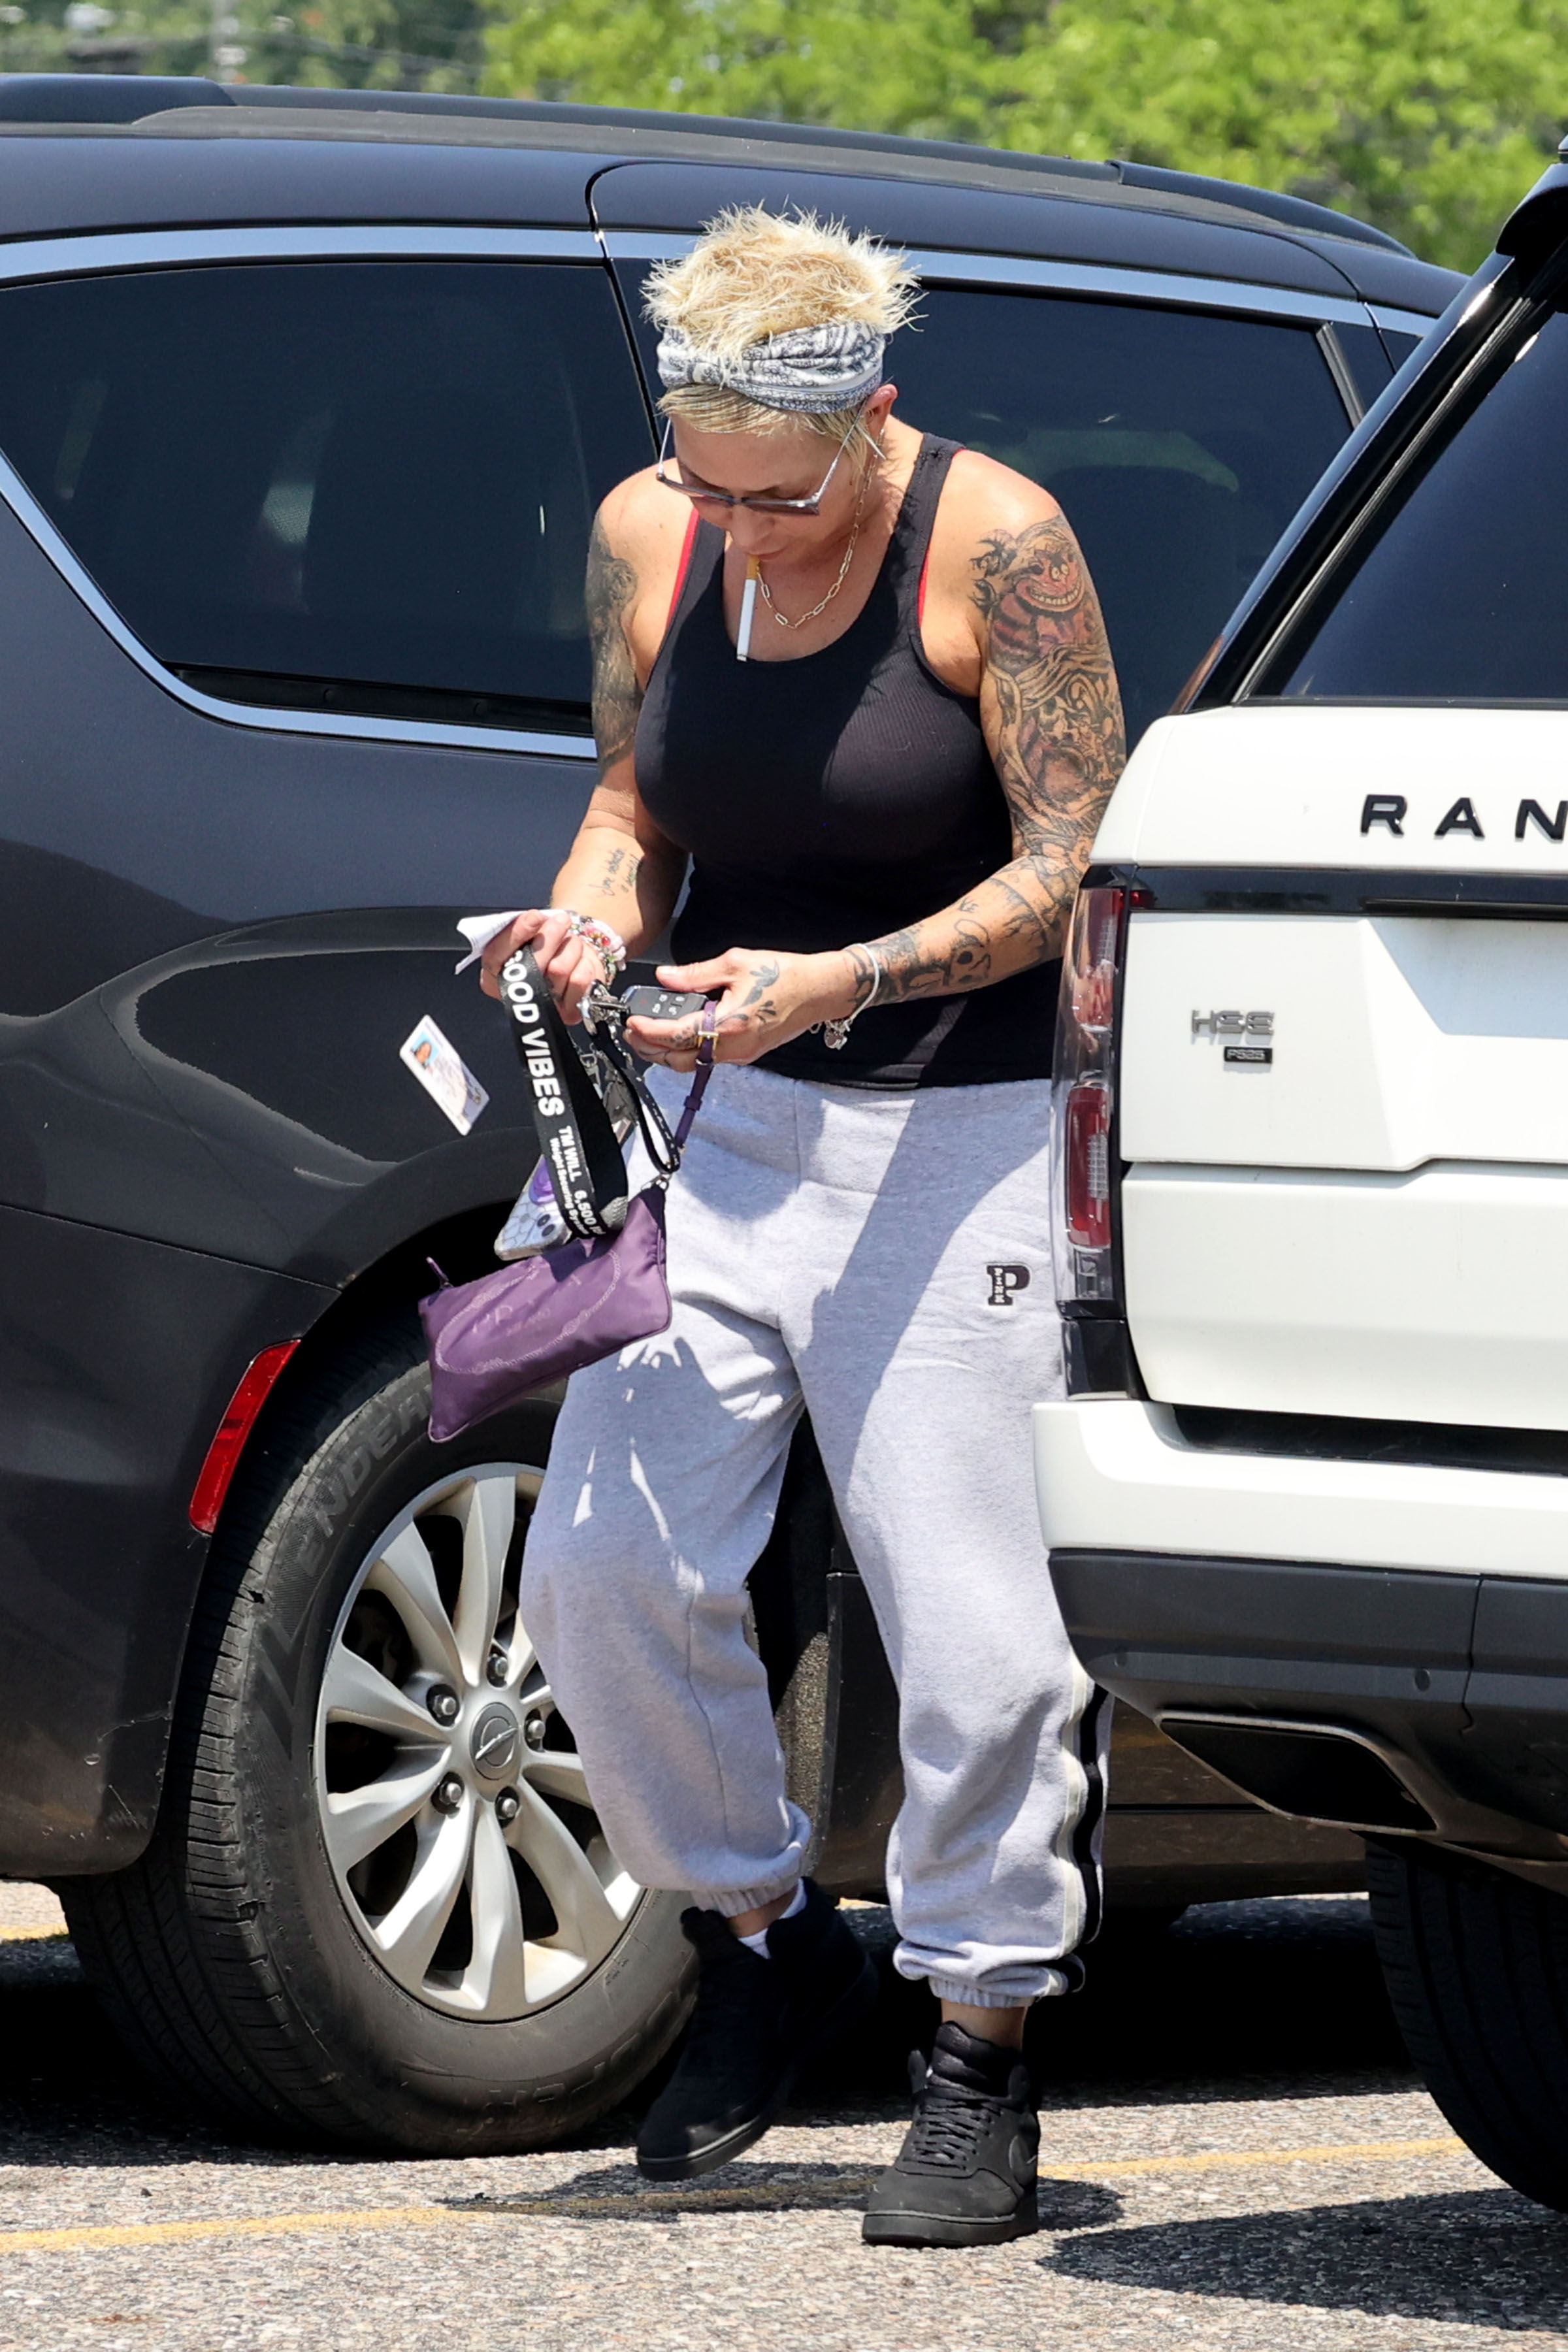 Eminem's ex-wife put a cigarette in her mouth as she stepped out of her car